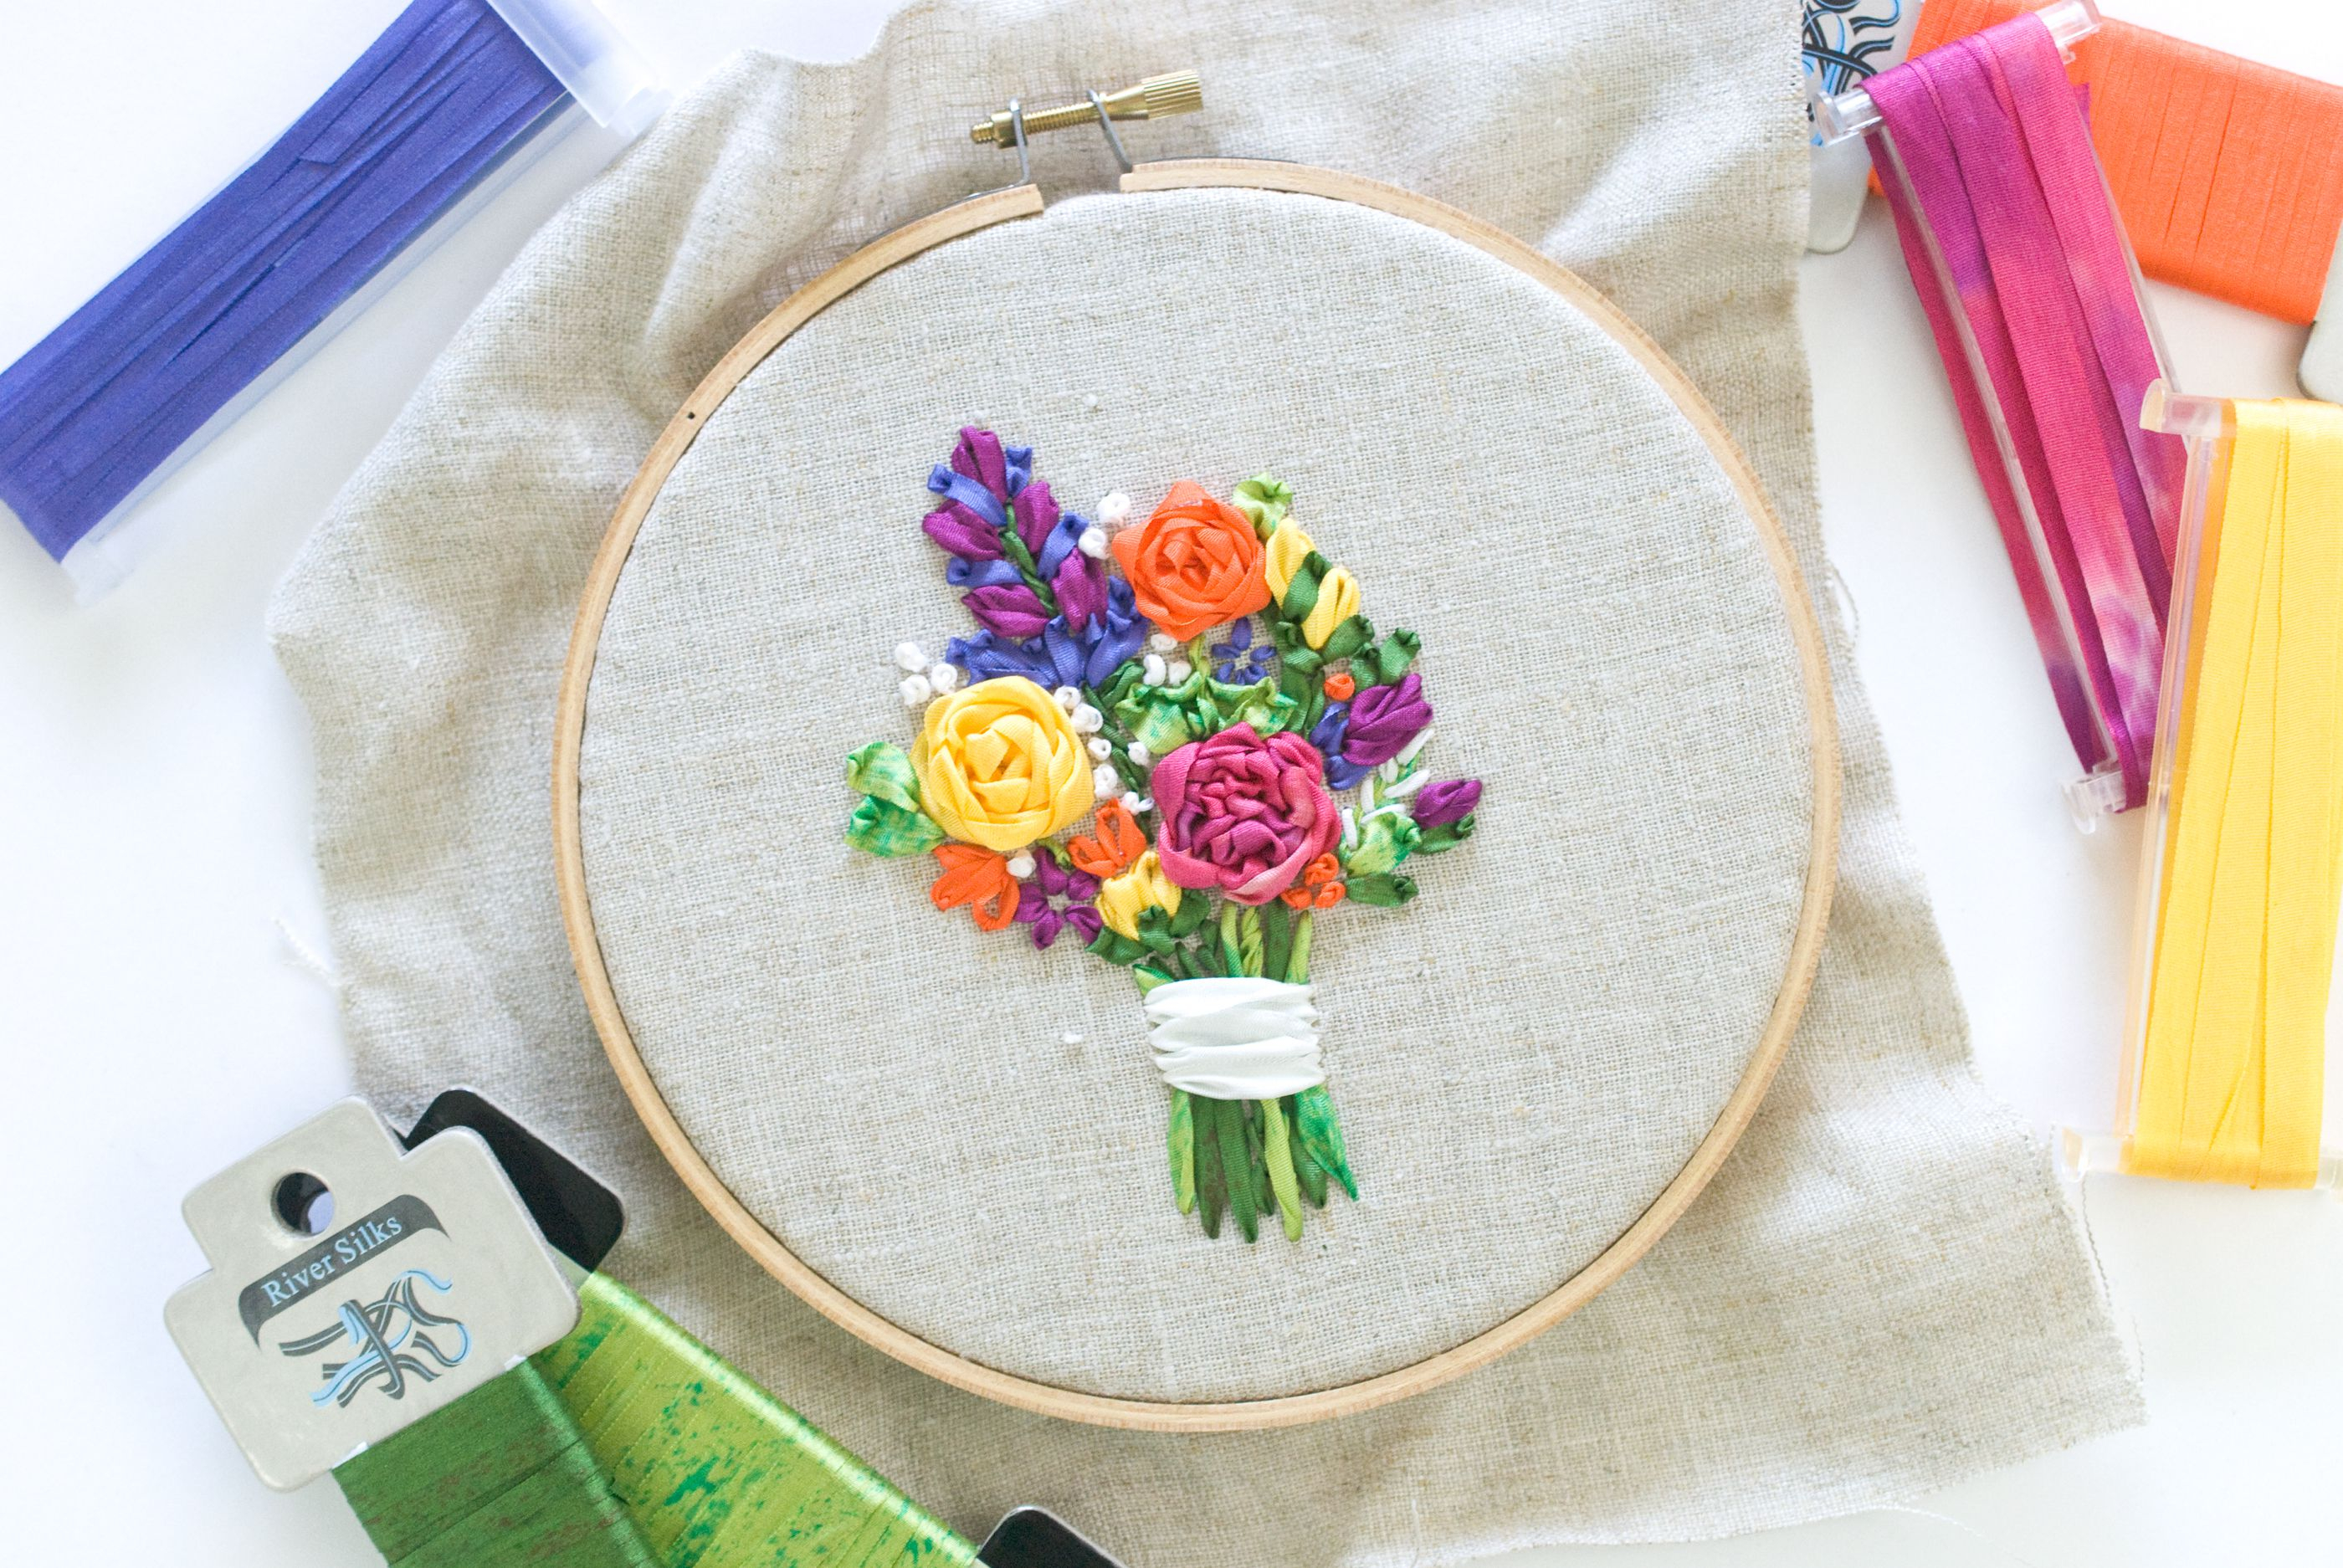 Silk Embroidery Patterns Free The Basics Of Silk Ribbon Embroidery